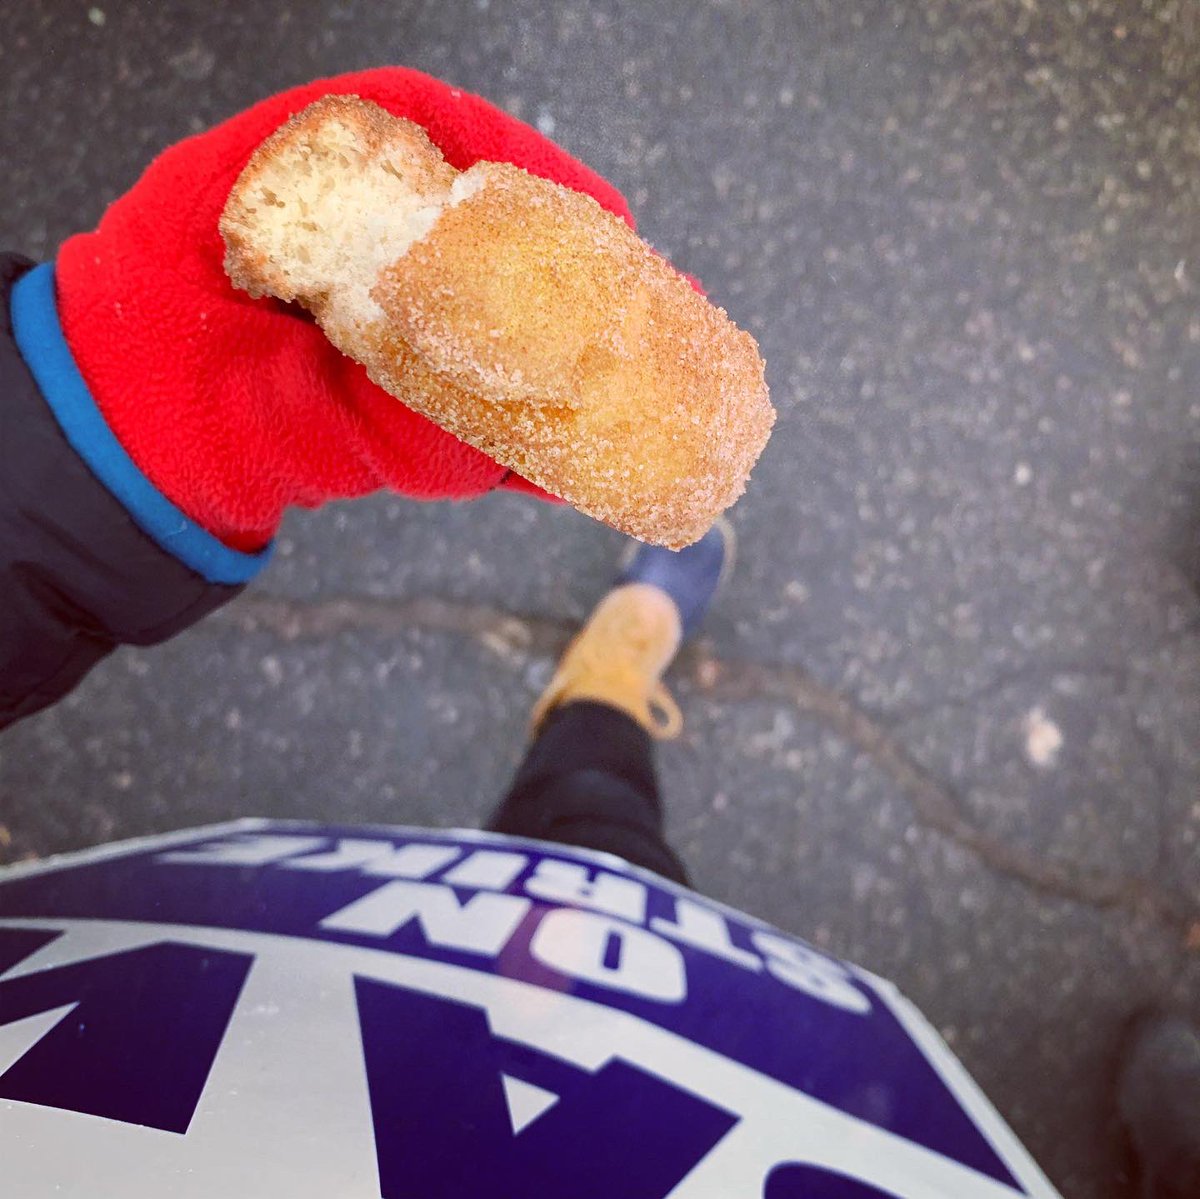 MVPs of today: 
1. the people (@hgsuuaw supporters/members??) who stopped me and @gwenaelle_ch to offer us apple cider donuts 
2. one of my Tufts undergrads who showed up to picket with us and told me I deserve better pay!! 🥰

Solidarity is so worth the cold ✊